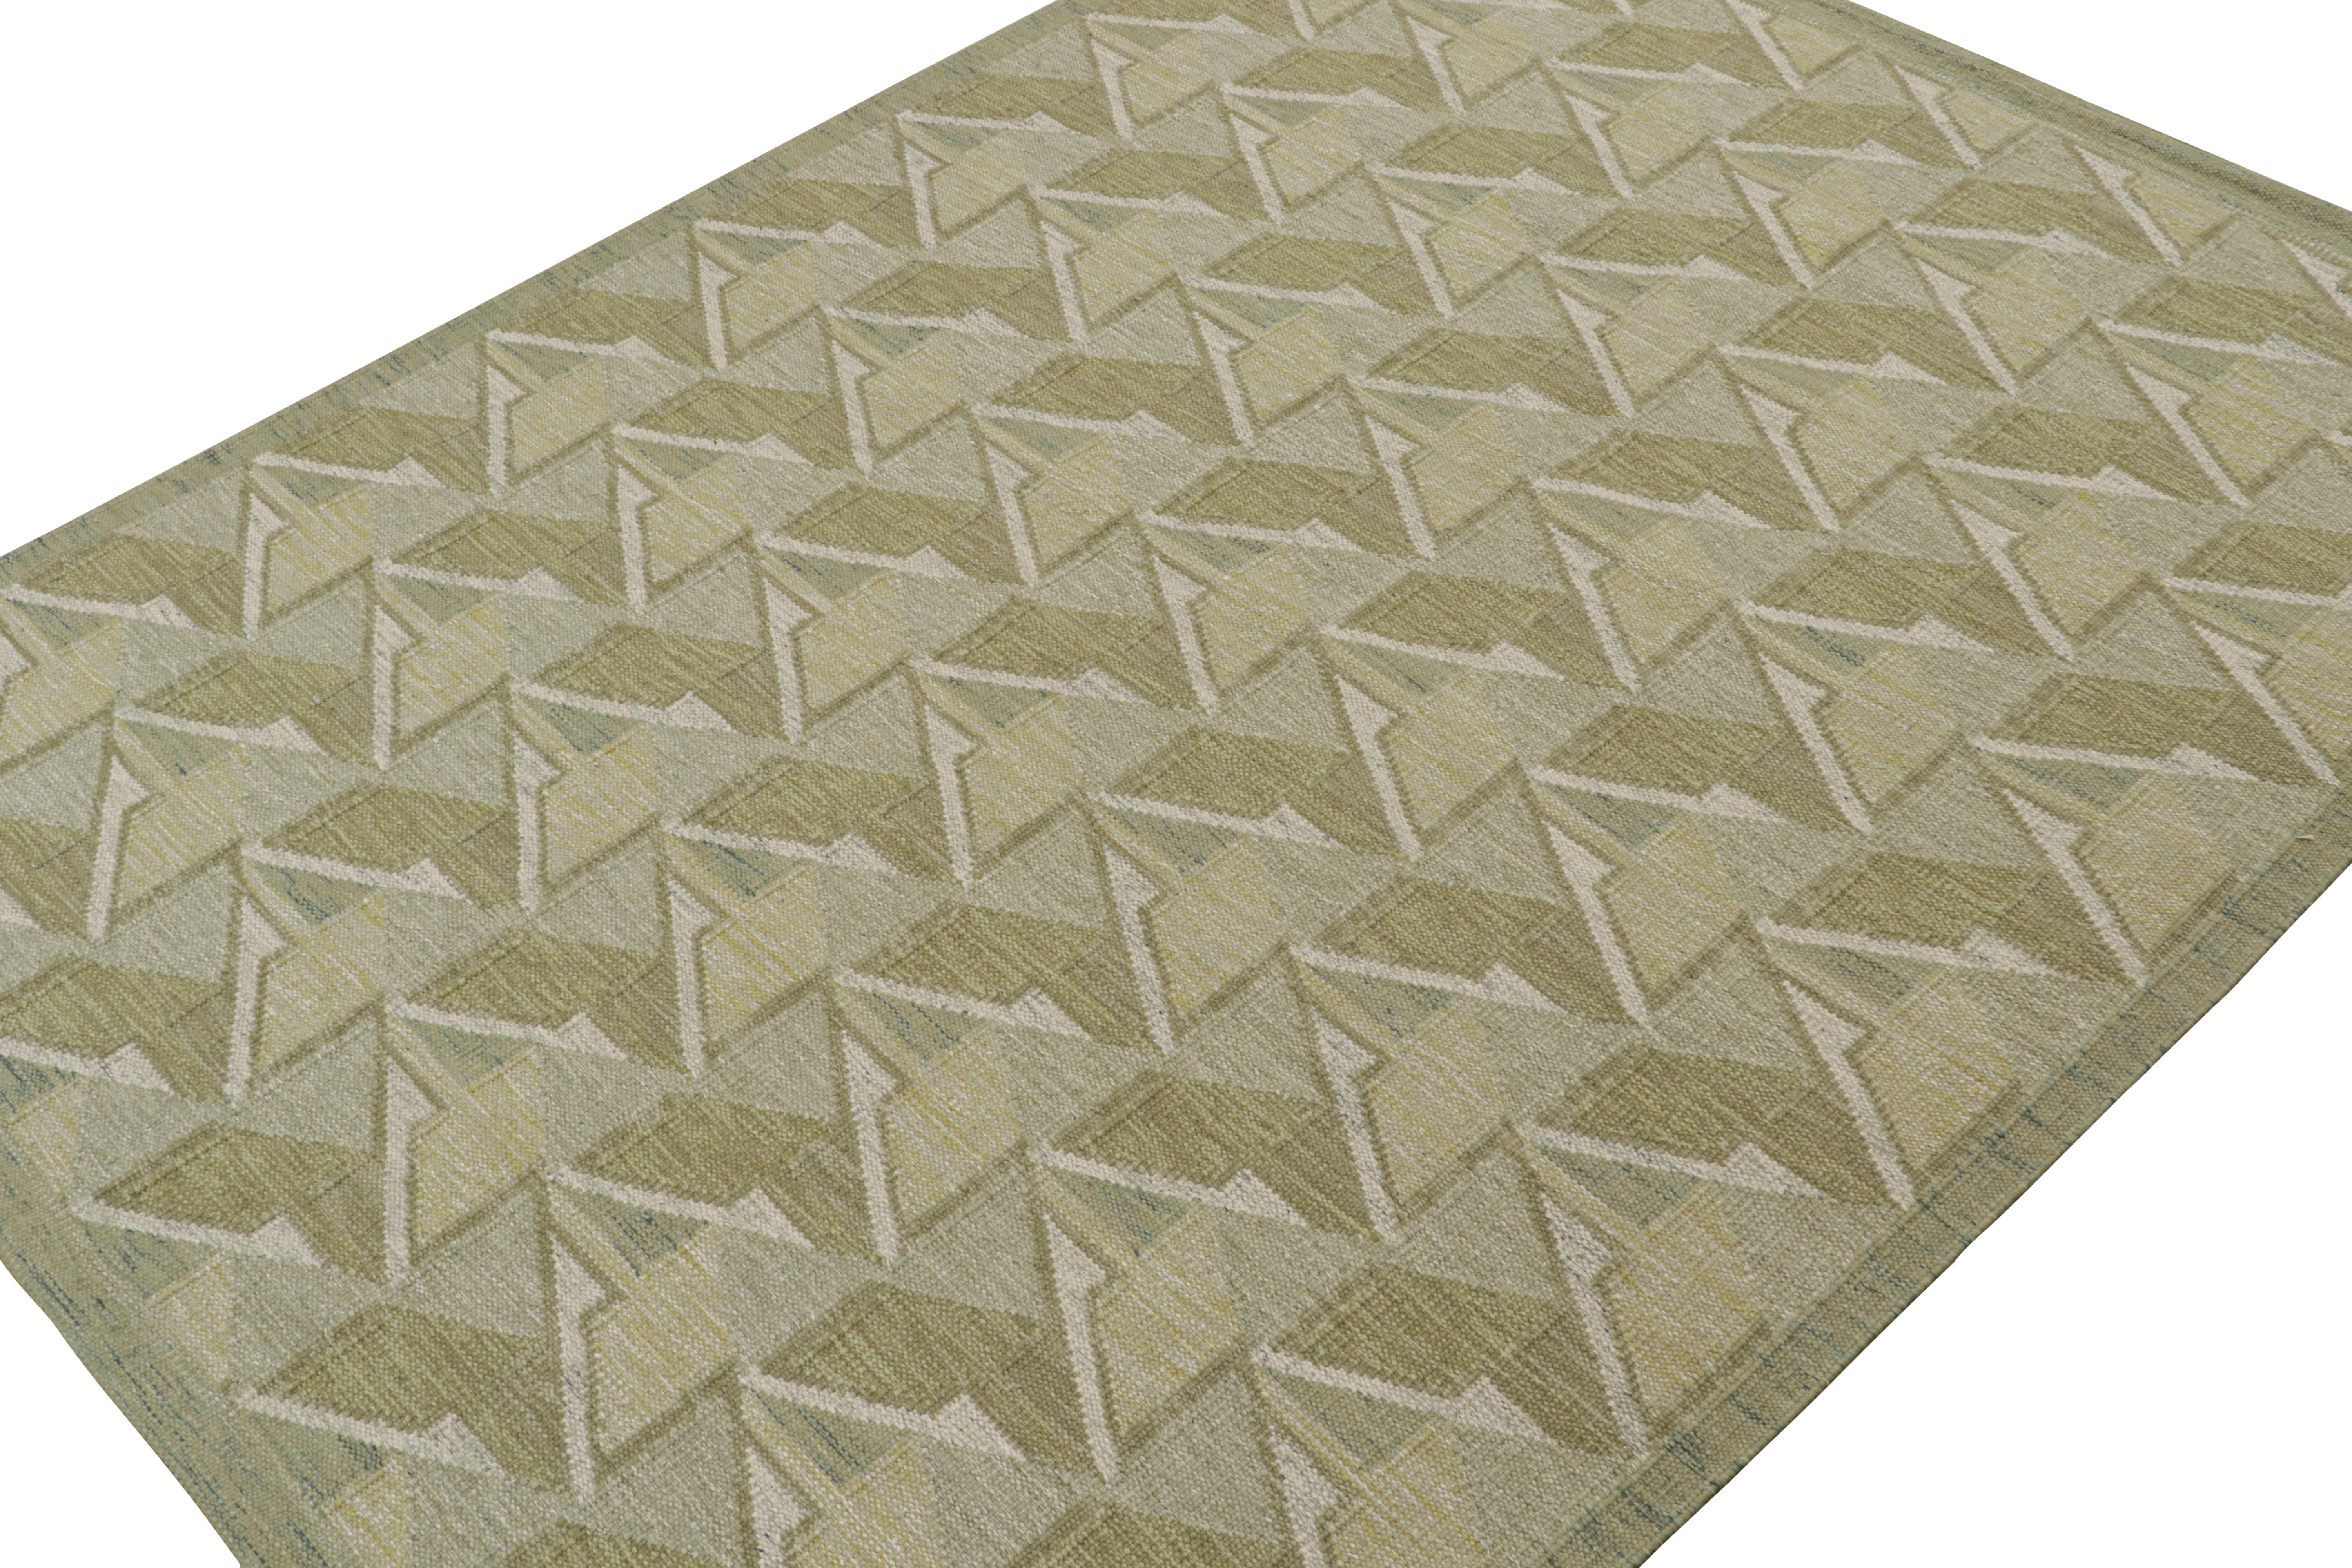 A smart 9x12 Swedish style custom kilim from our award-winning Scandinavian flat weave collection. Handwoven in wool, cotton & undyed natural yarns

On the Design: 

This rug enjoys geometric patterns in tones of green. Keen eyes will admire undyed,